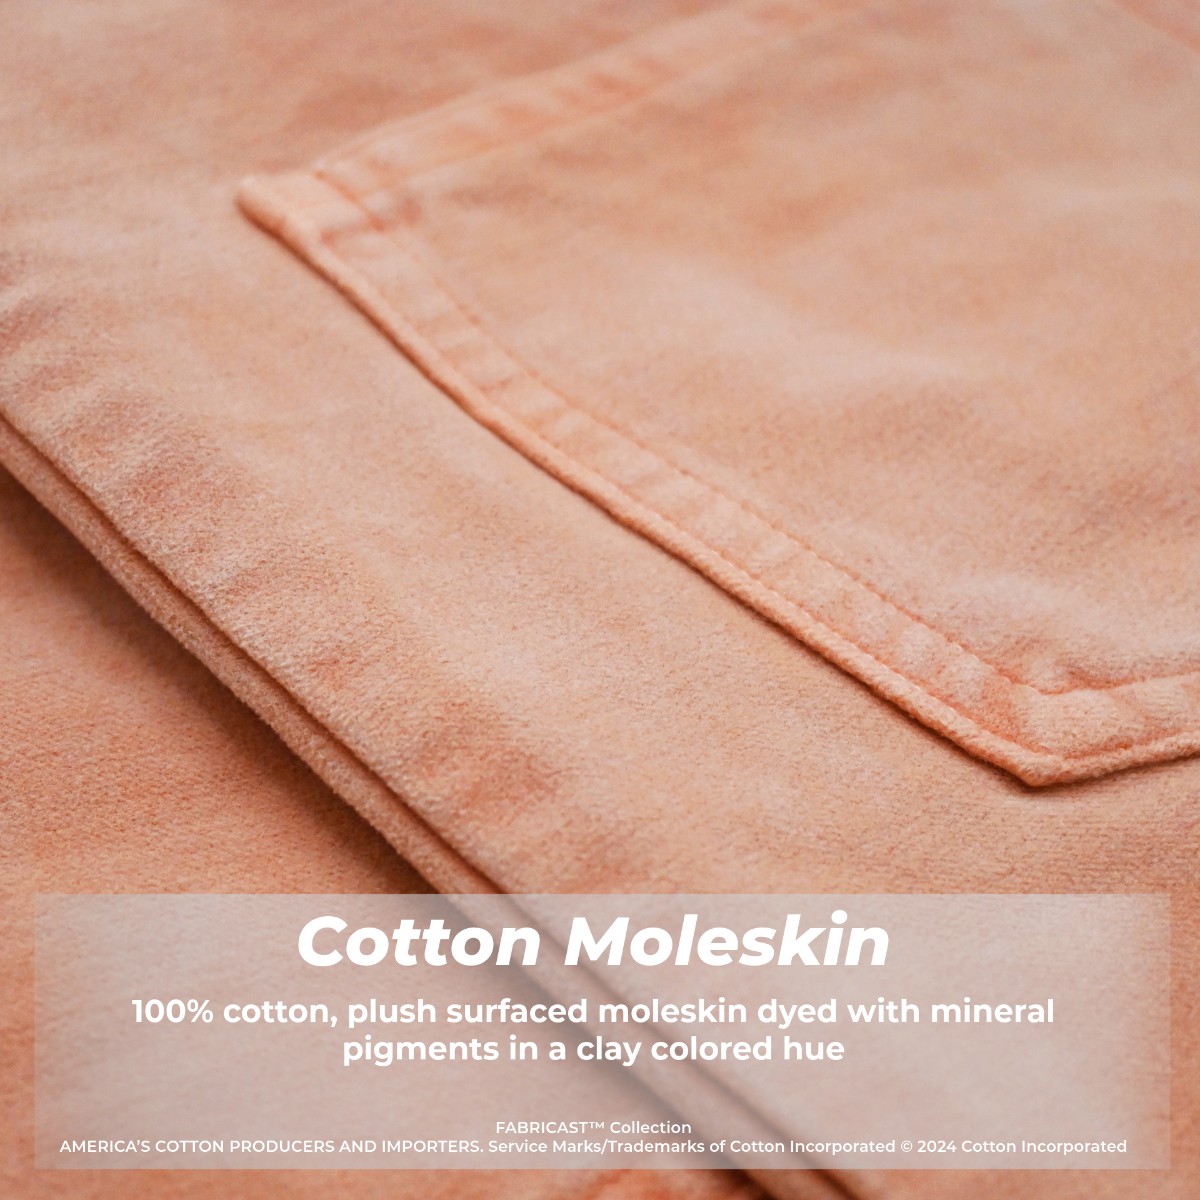 This 100% #cotton, plush surfaced moleskin was dyed with mineral pigments in a clay colored hue. These naturally sourced pigments offer very good light & wash fastness properties. @Cotton_Works #FabricFriday cottonworks.com/en/fabricast/7…